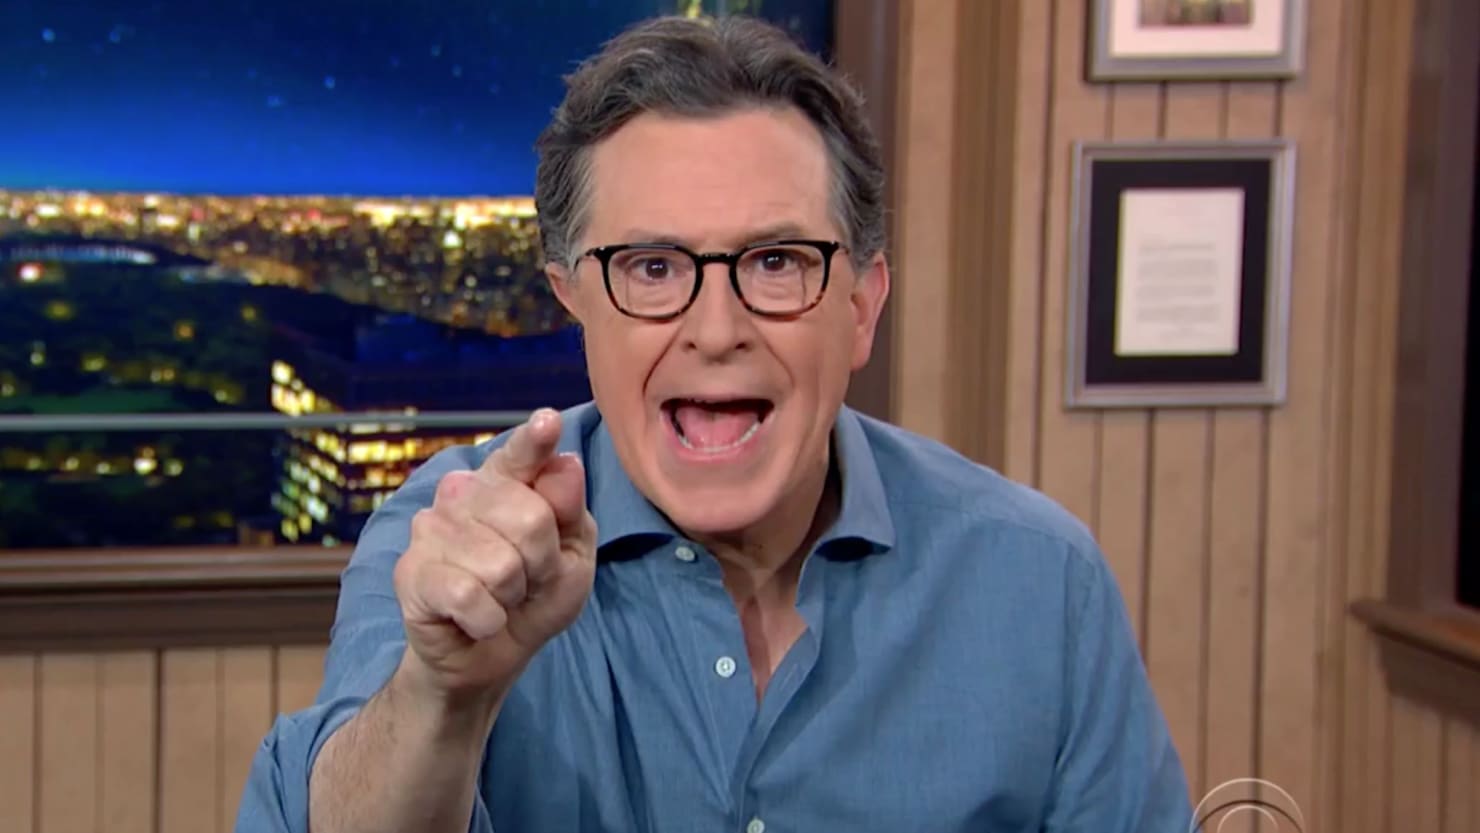 Stephen Colbert is angry with Republicans calling for “unity” after the Capitol uprising